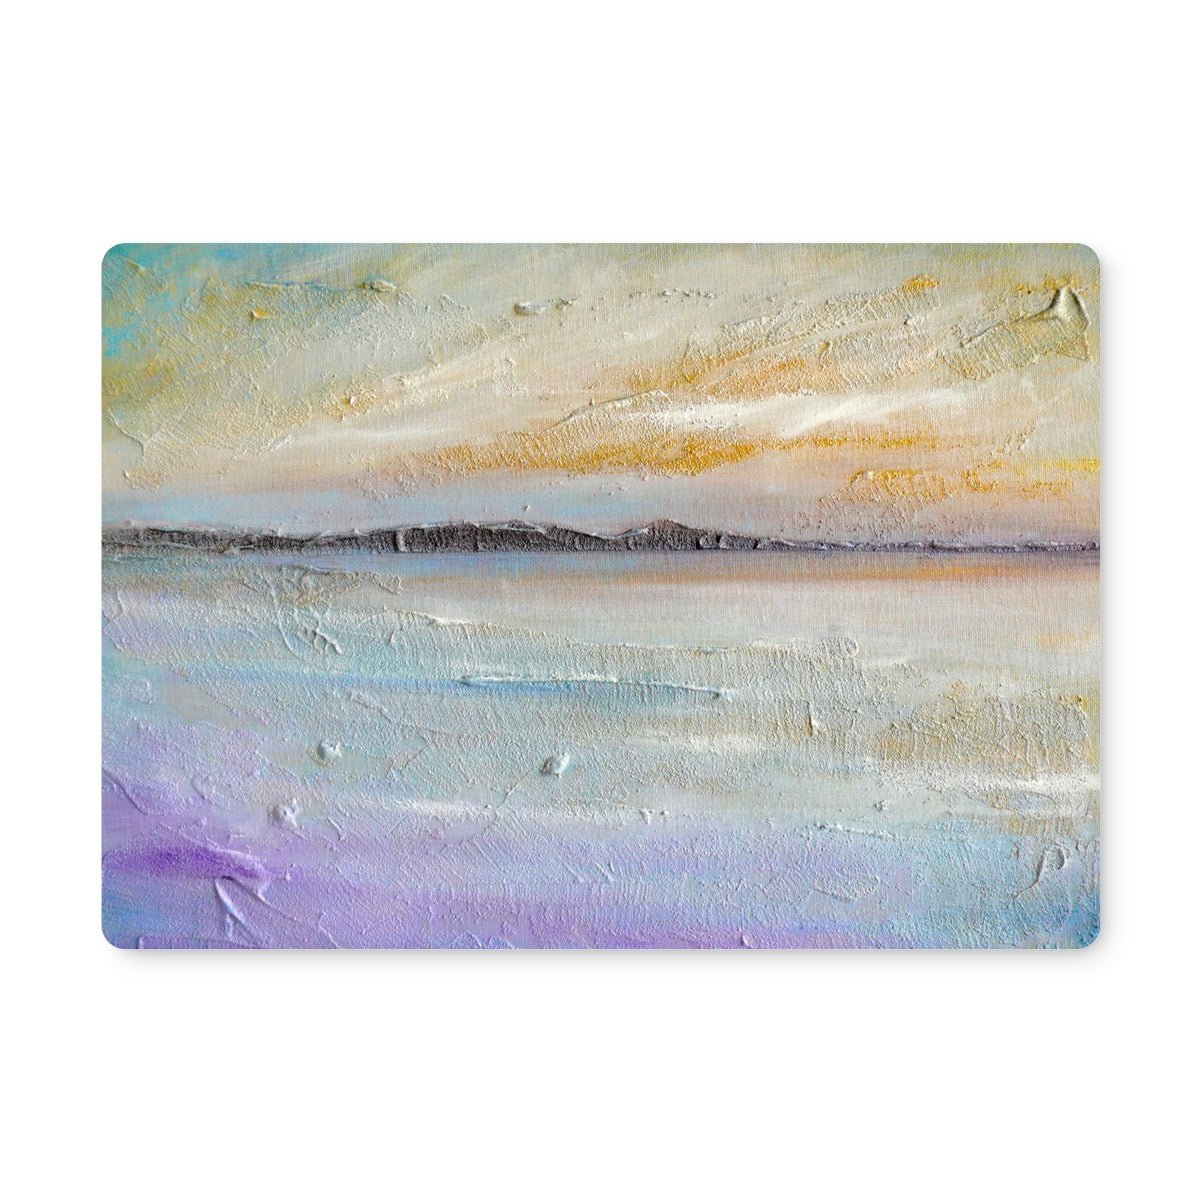 Sollas Beach South Uist Art Gifts Placemat-Placemats-Hebridean Islands Art Gallery-4 Placemats-Paintings, Prints, Homeware, Art Gifts From Scotland By Scottish Artist Kevin Hunter